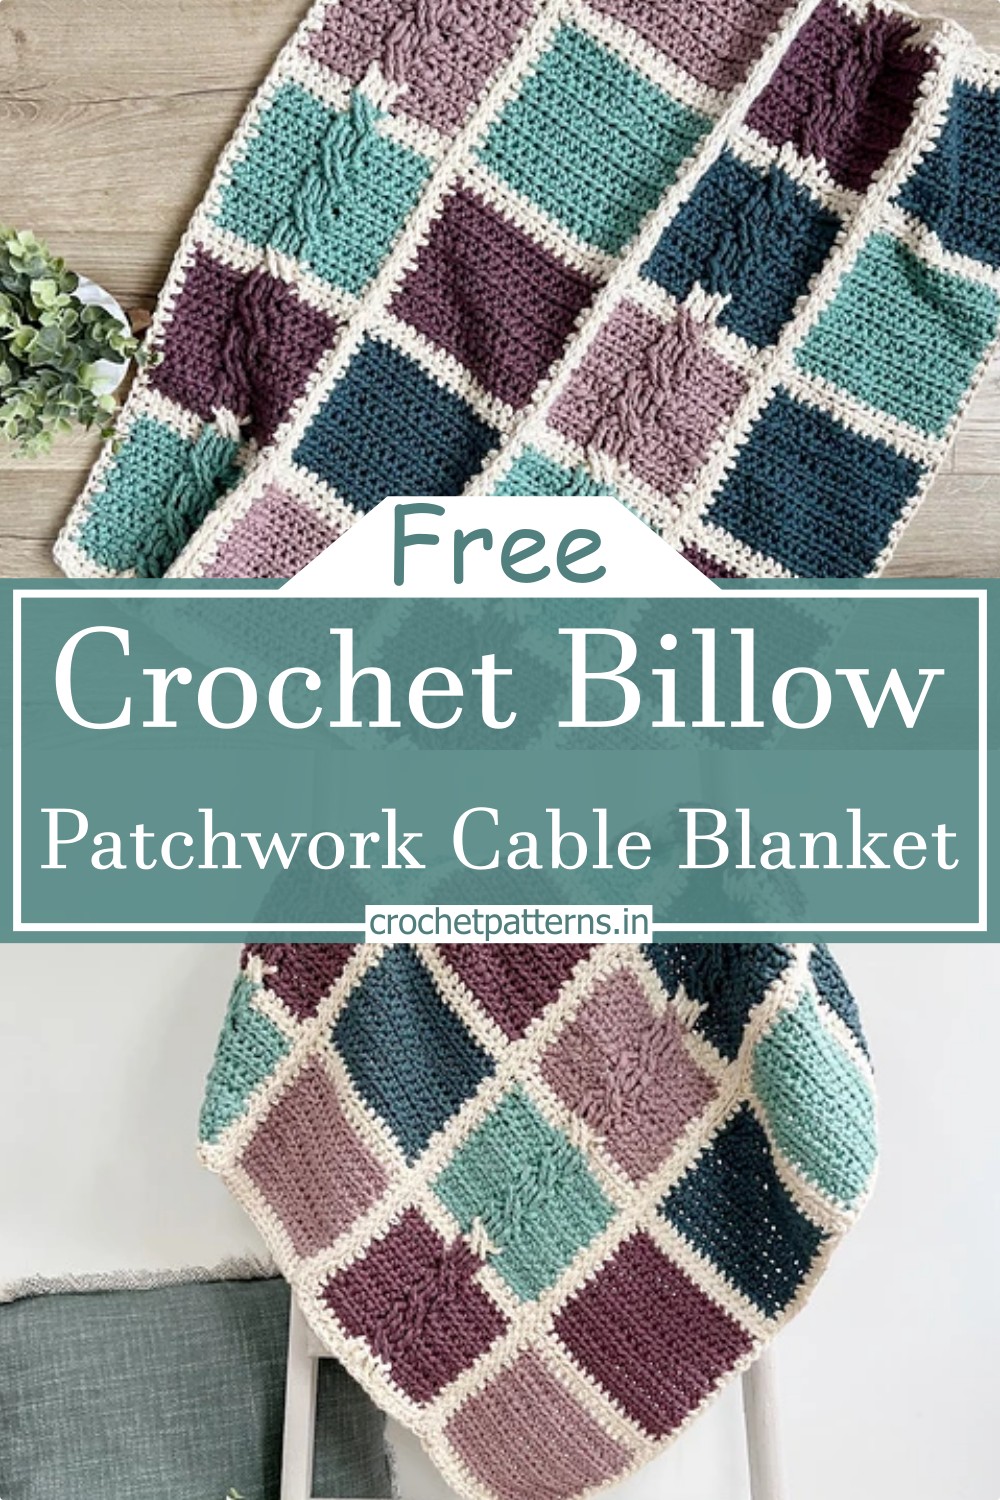 Billow Patchwork Cable Blanket